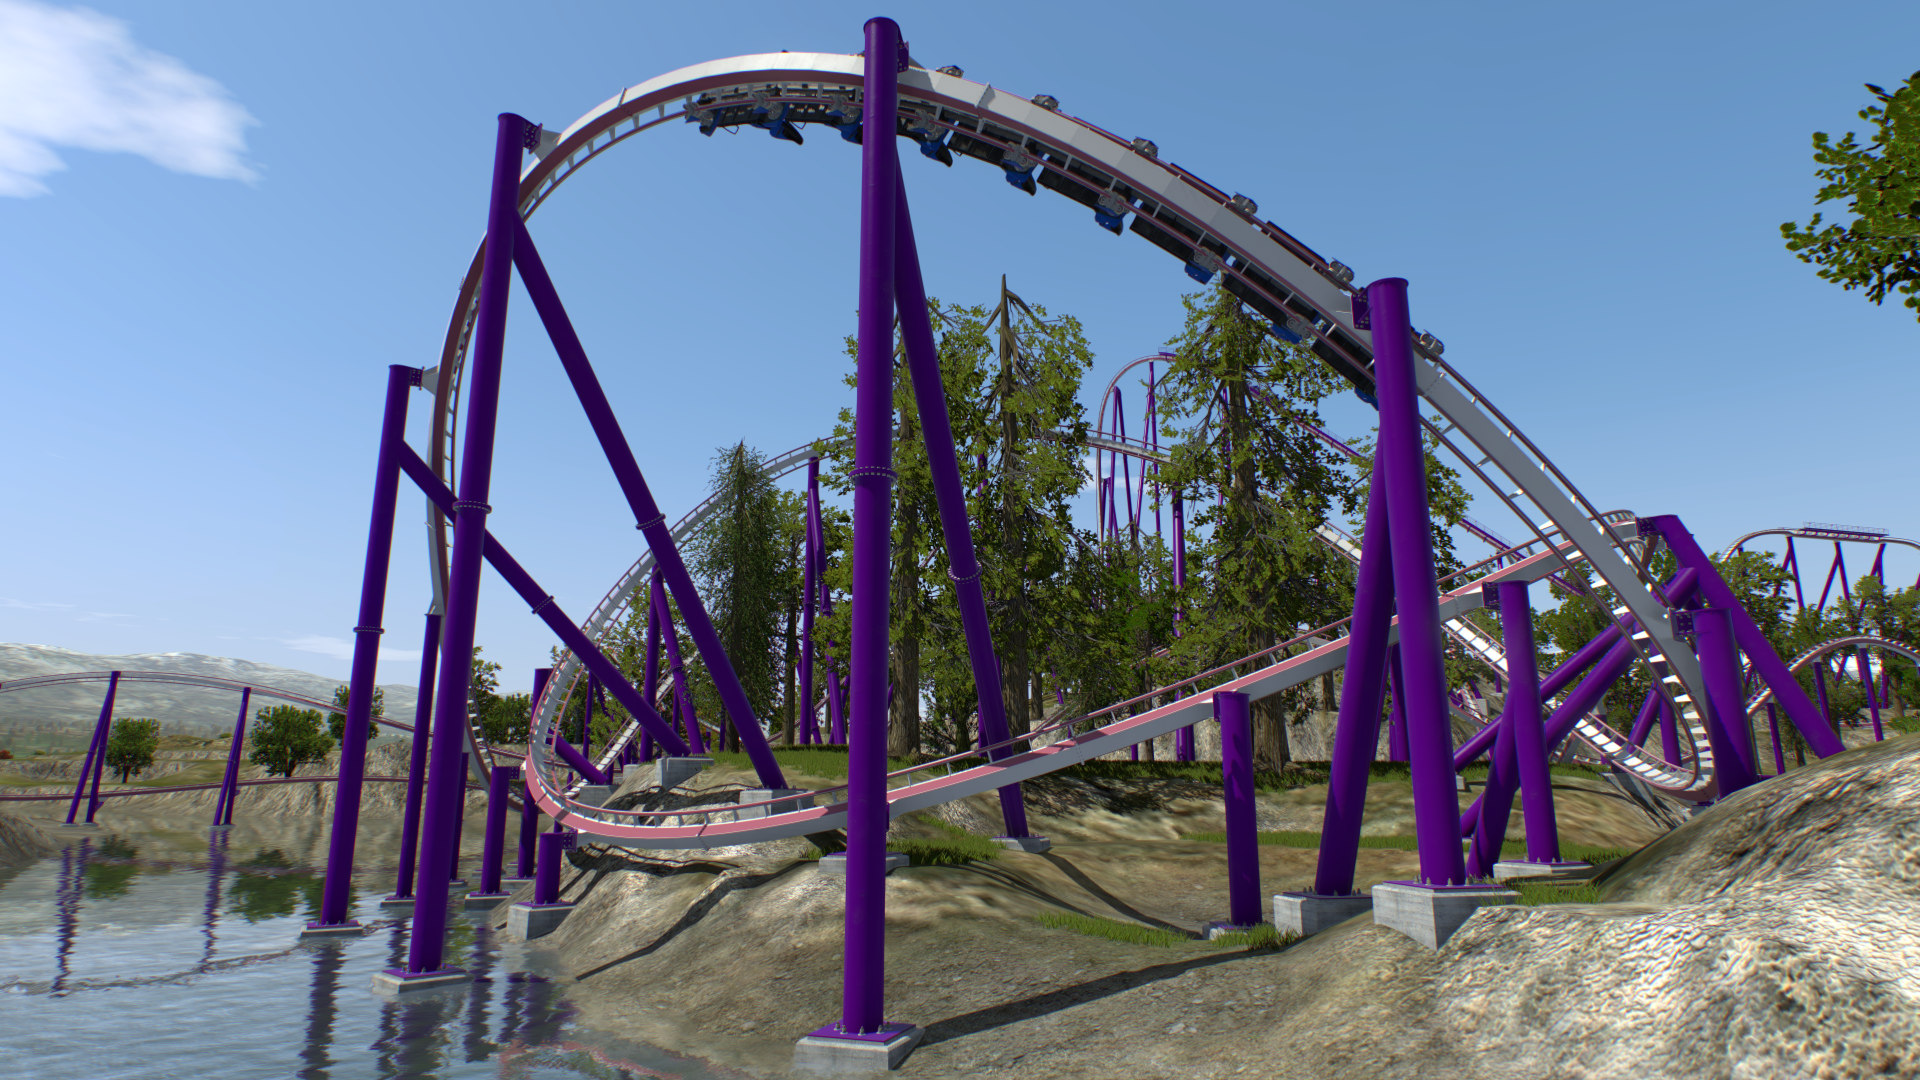 NOLIMITS 2 ROLLER COASTER SIMULATION Version Full Game Free Download